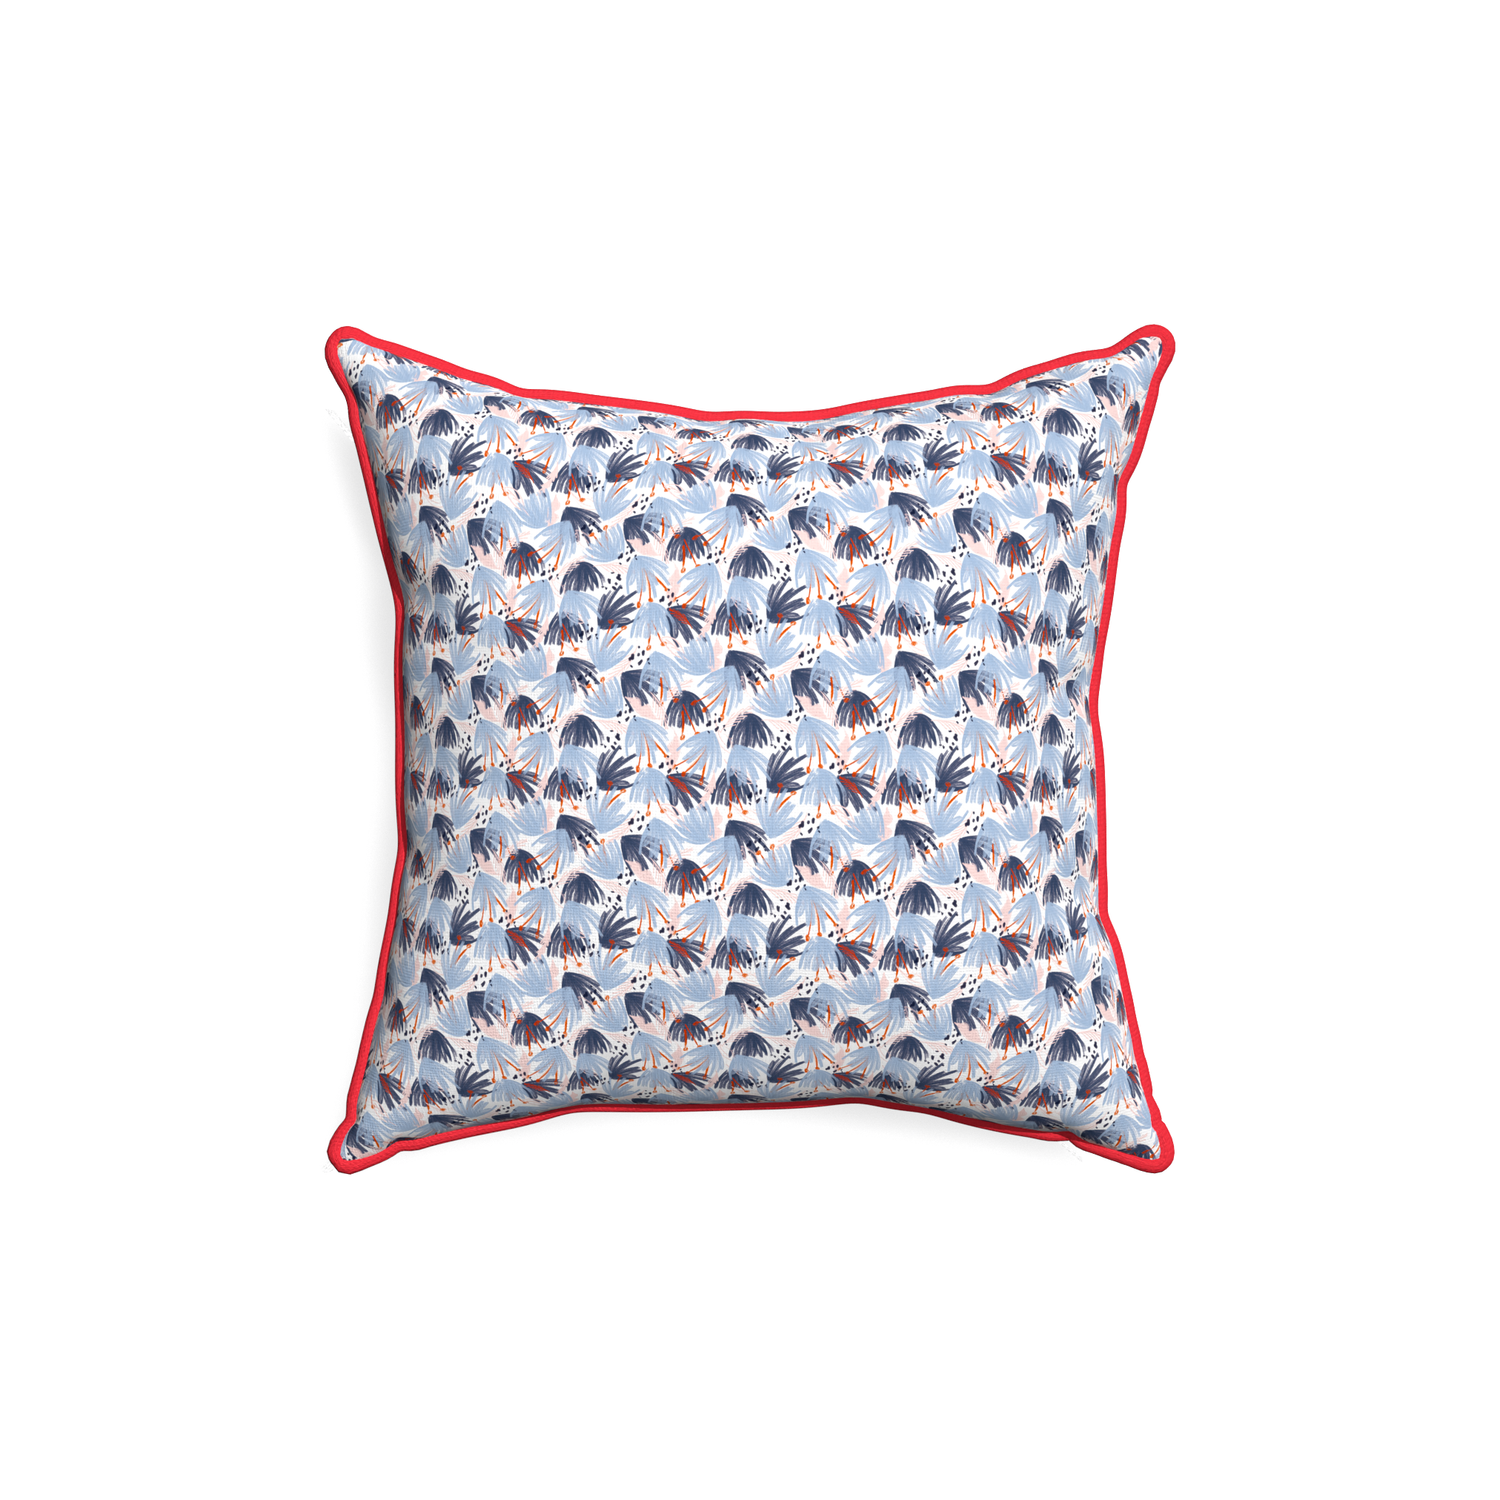 18-square eden blue custom pillow with cherry piping on white background